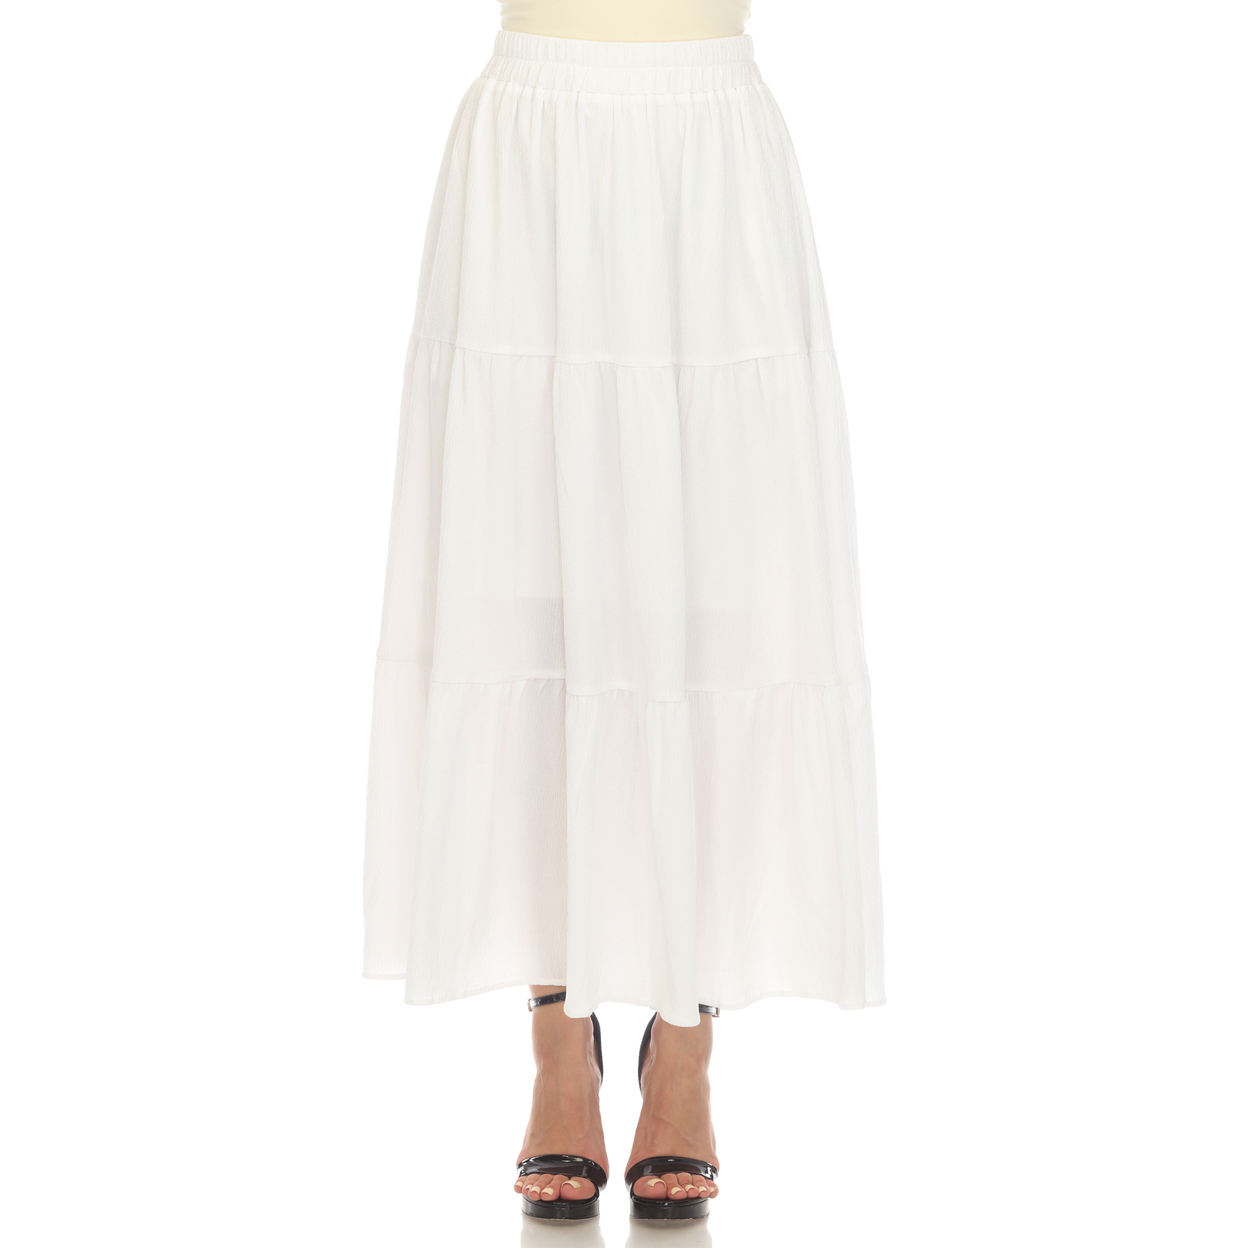 White Mark Women's Pleated Tiered Maxi Skirt - Navy, X-large